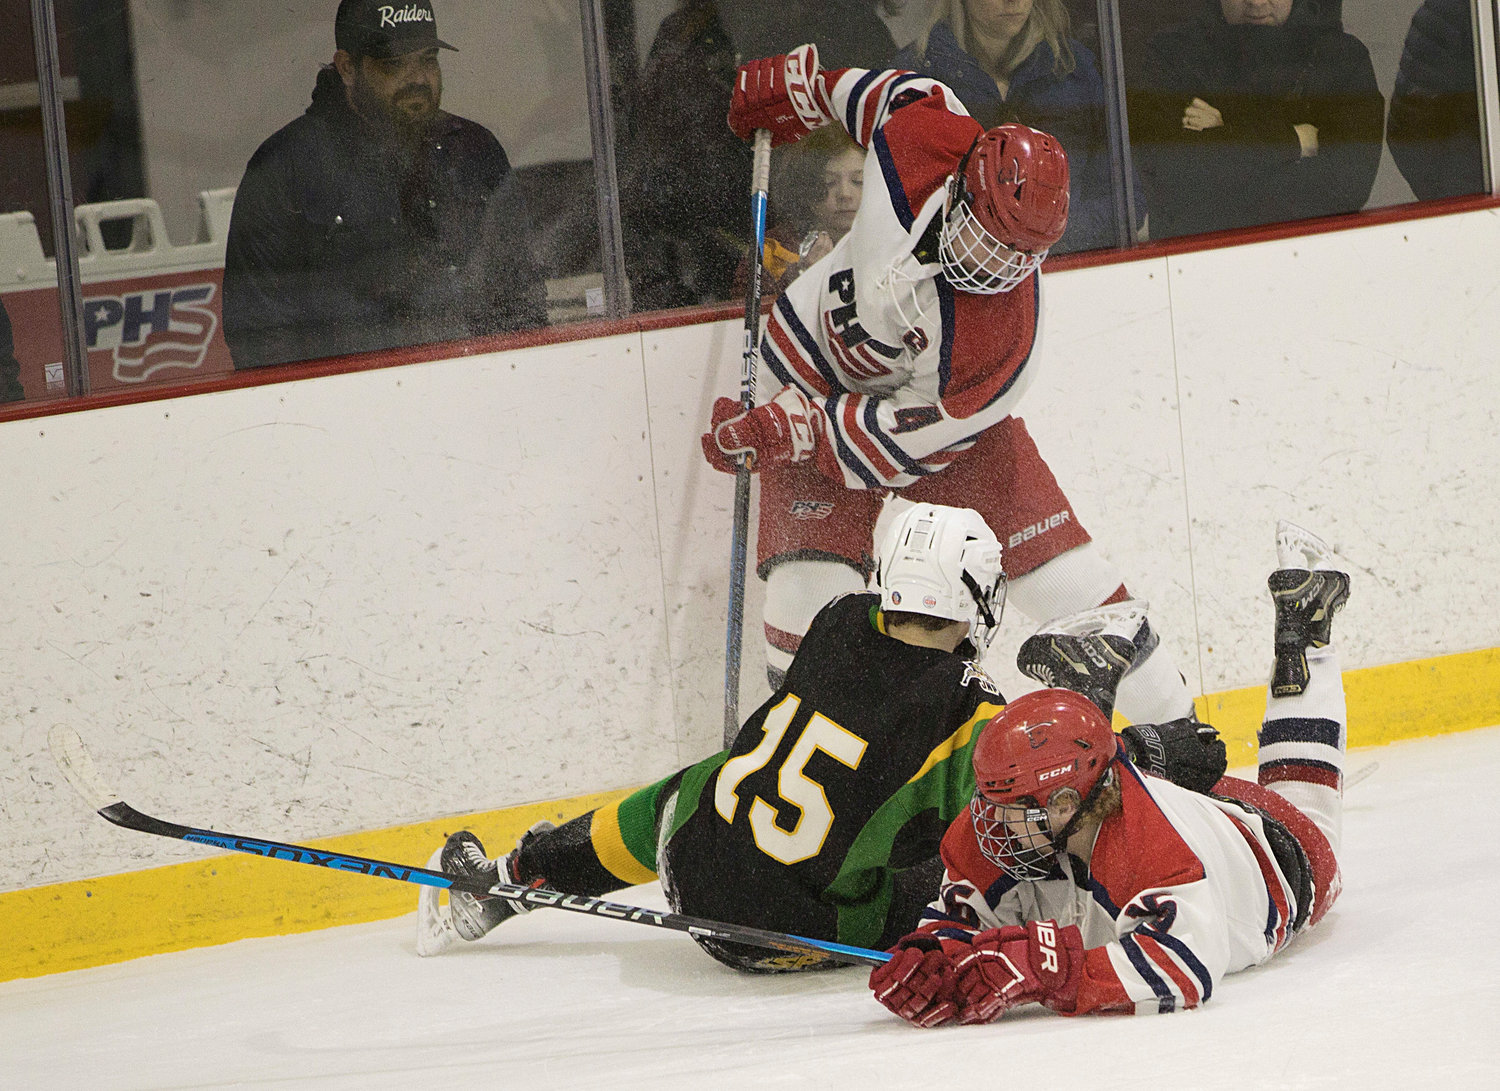 Andrew Alvanas digs the puck out from under teammate Shane Temple and a North Smithfield opponent.